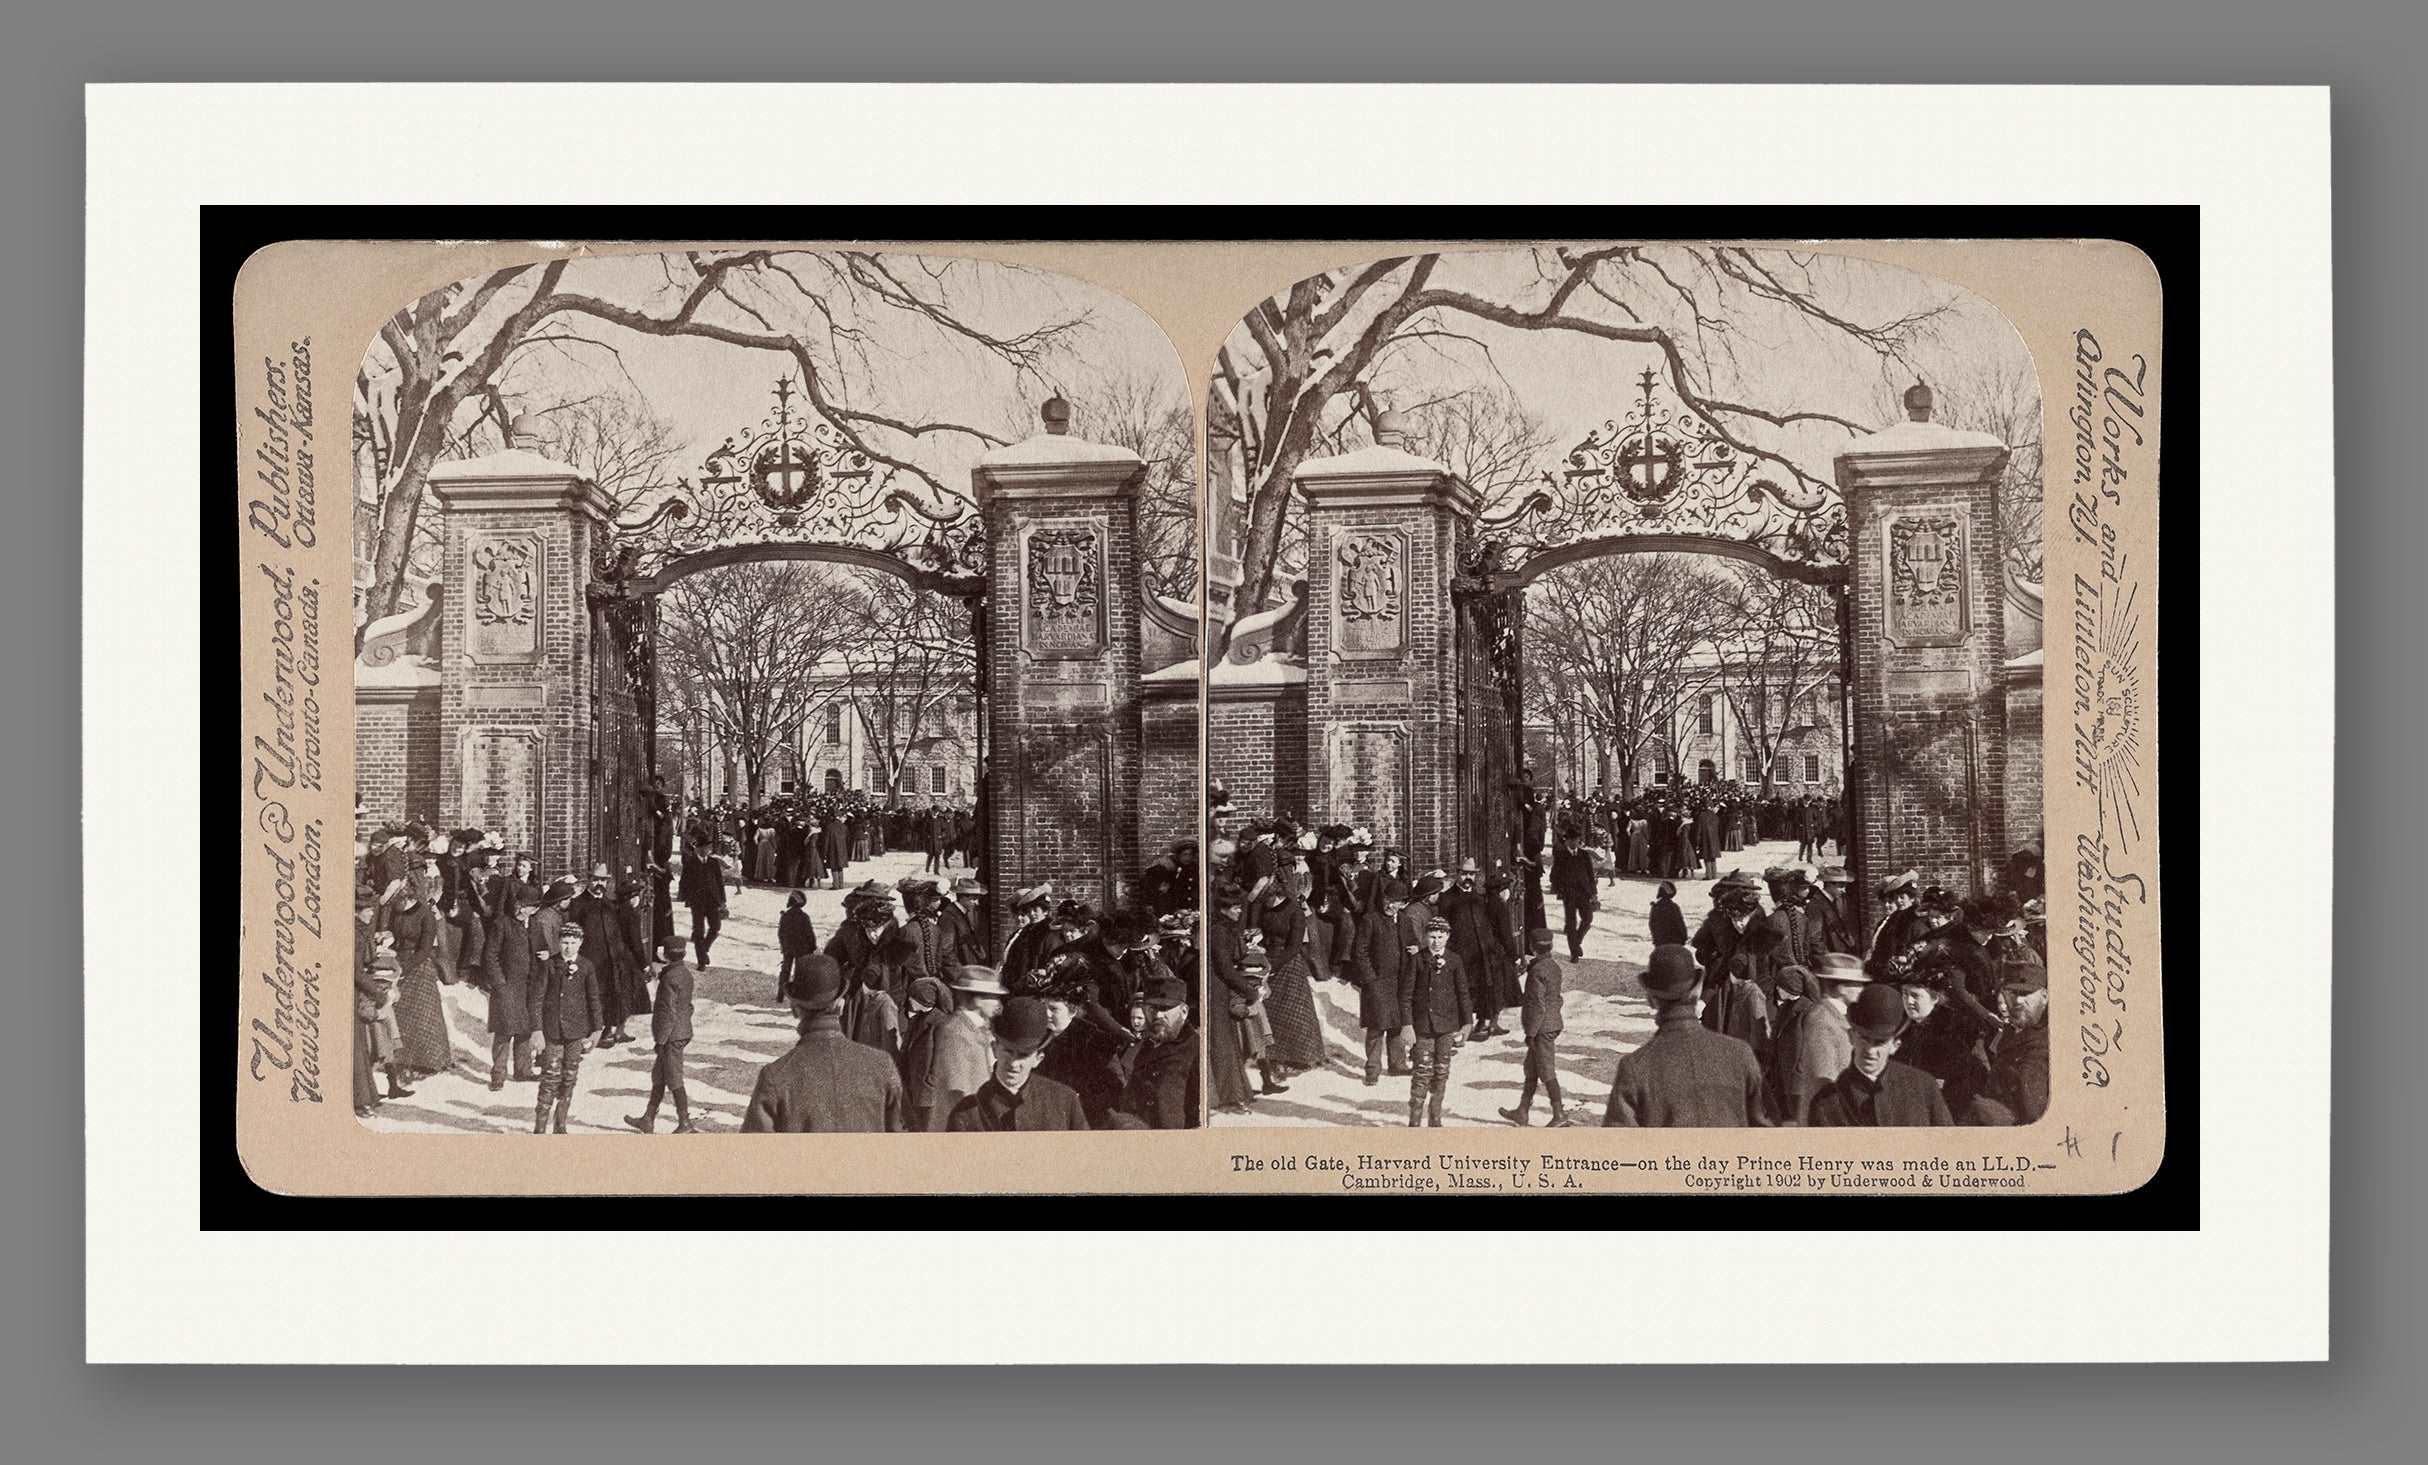 A paper print reproduction of a vintage stereograph image of Harvard University